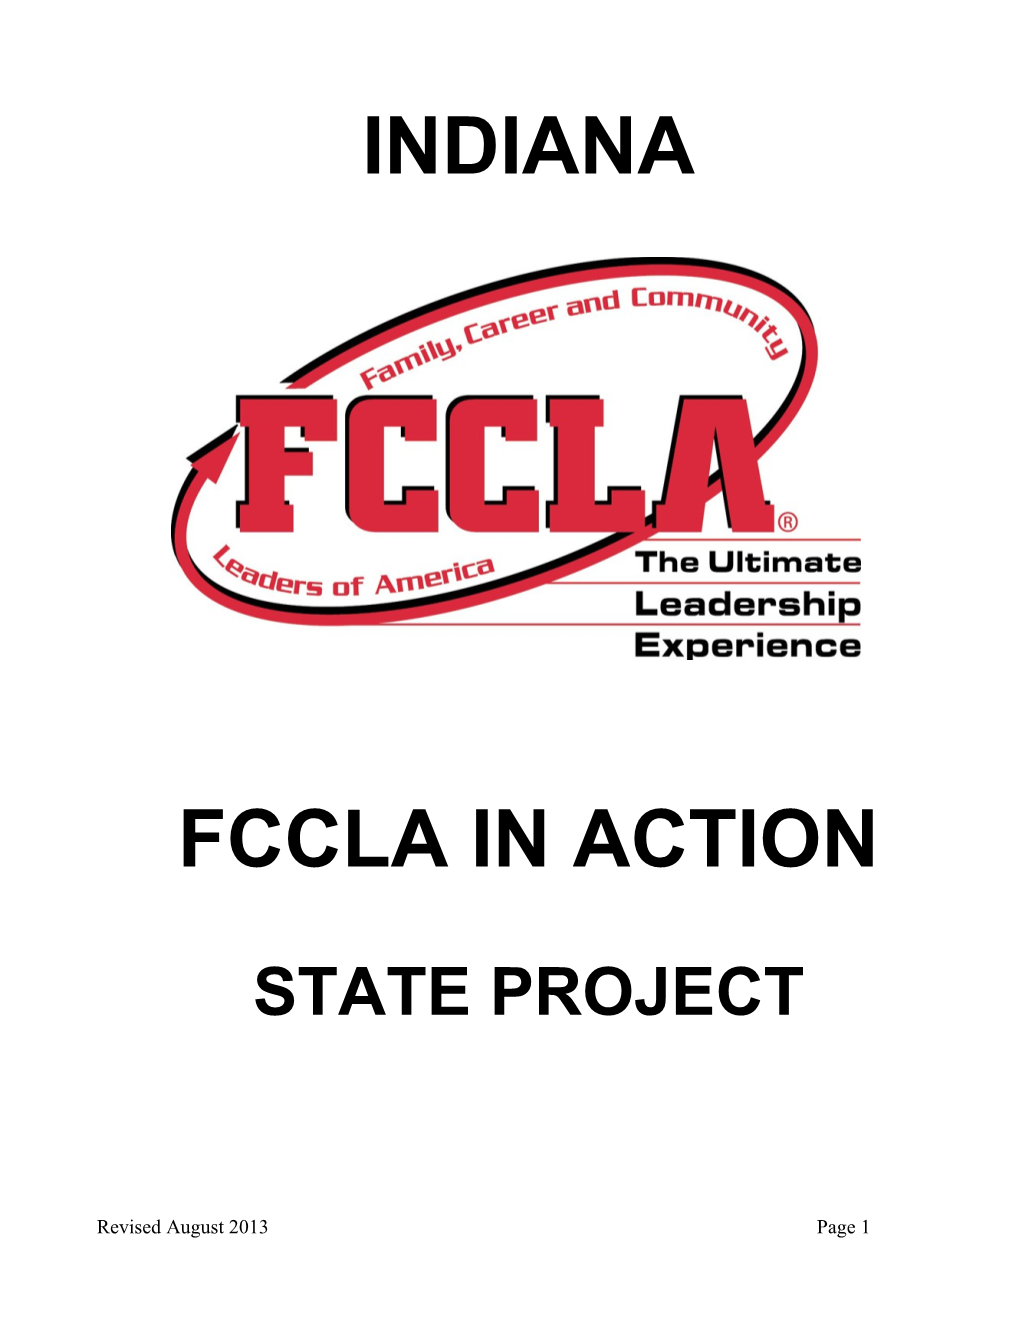 Indiana FCCLA State Project s1